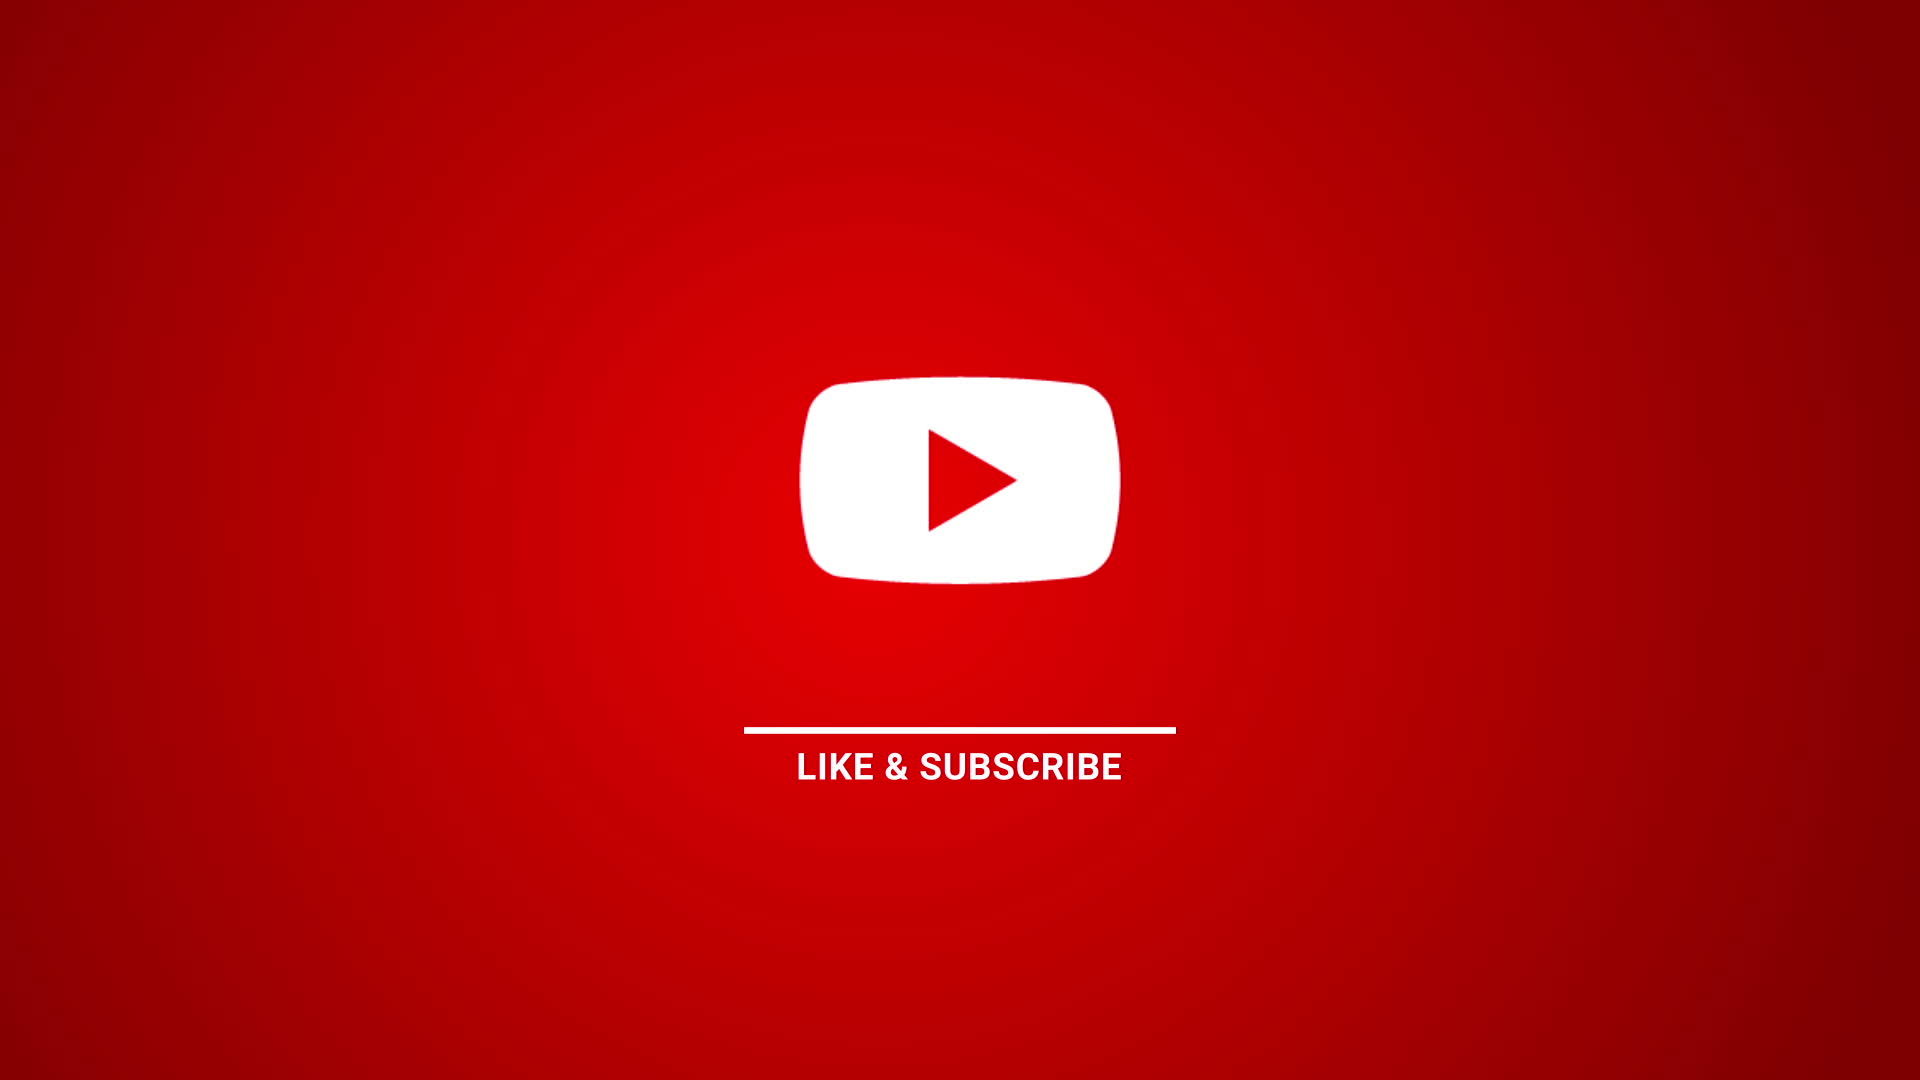 Youtube Intro Stock Video Footage for Free Download